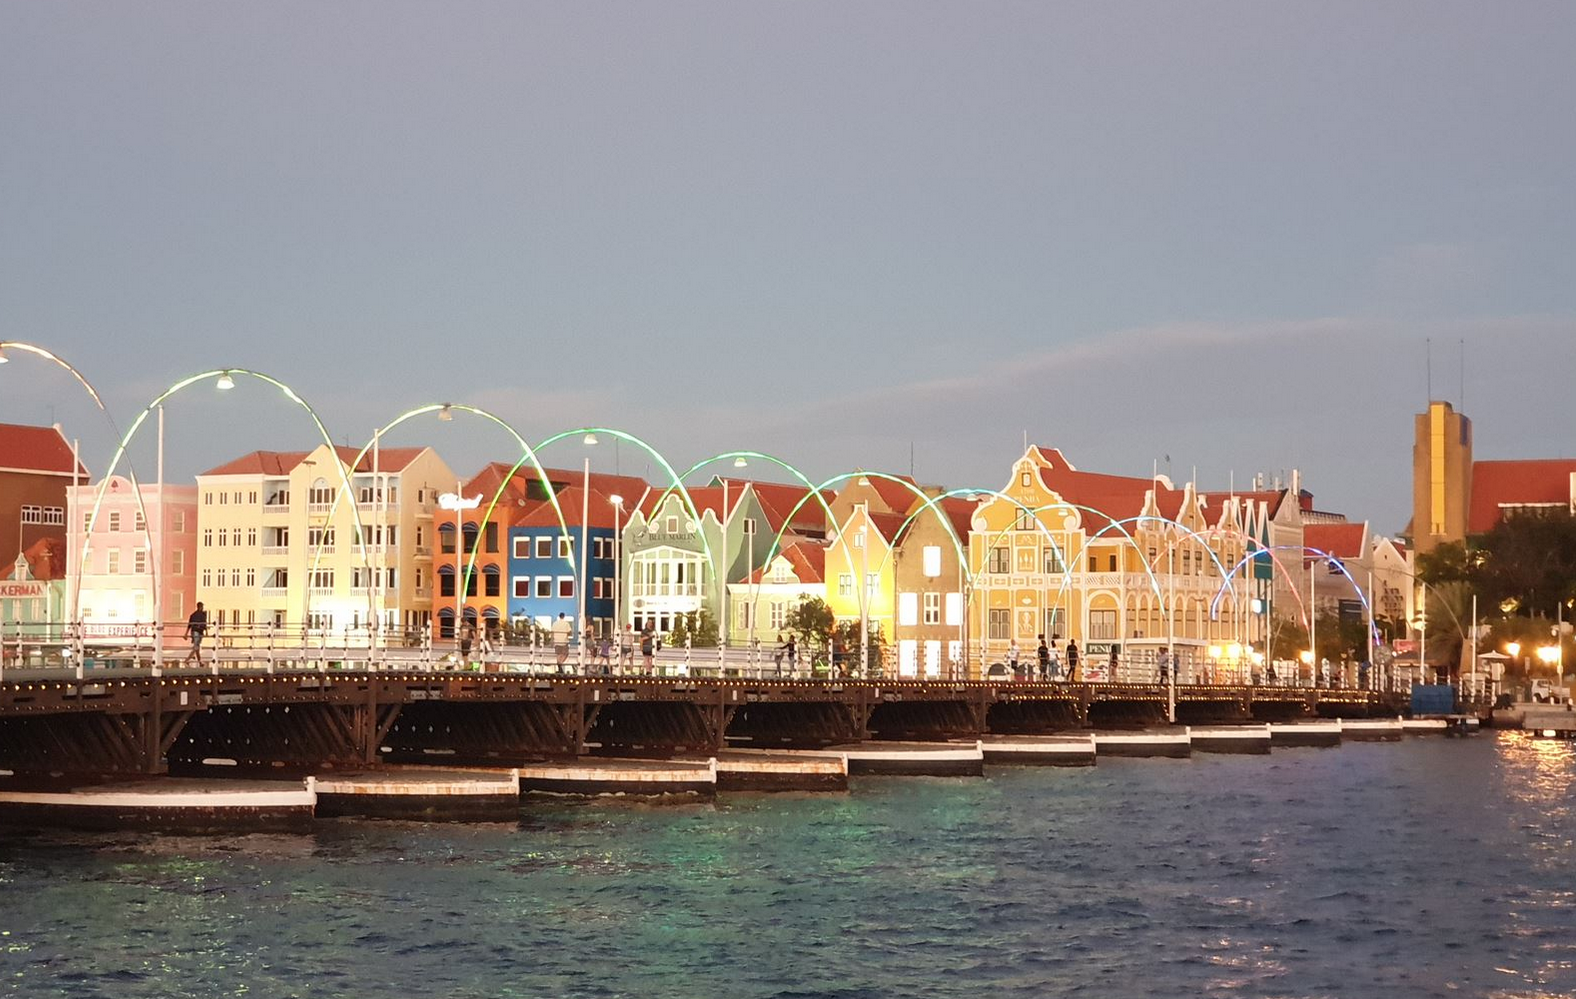 Curaçao implements extra test requirment for travelers arriving from Bonaire